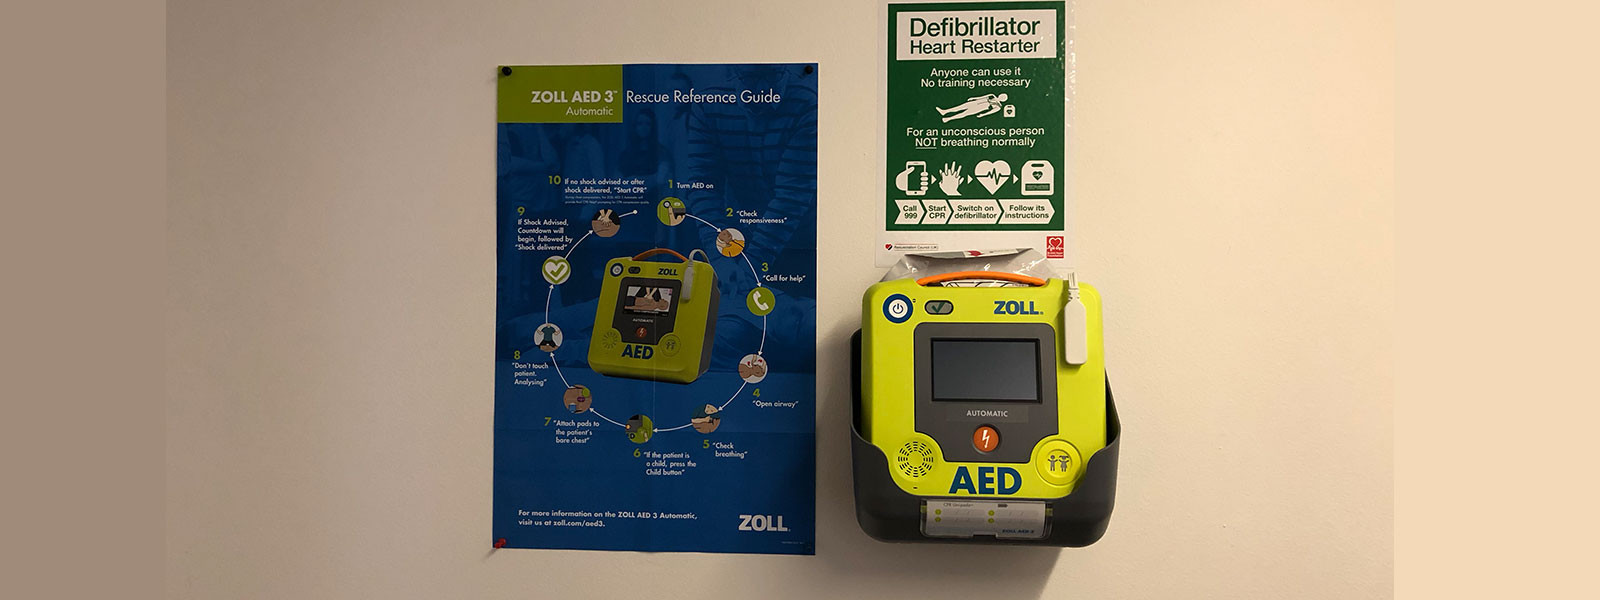 Direct Air invests in workplace defibrillator